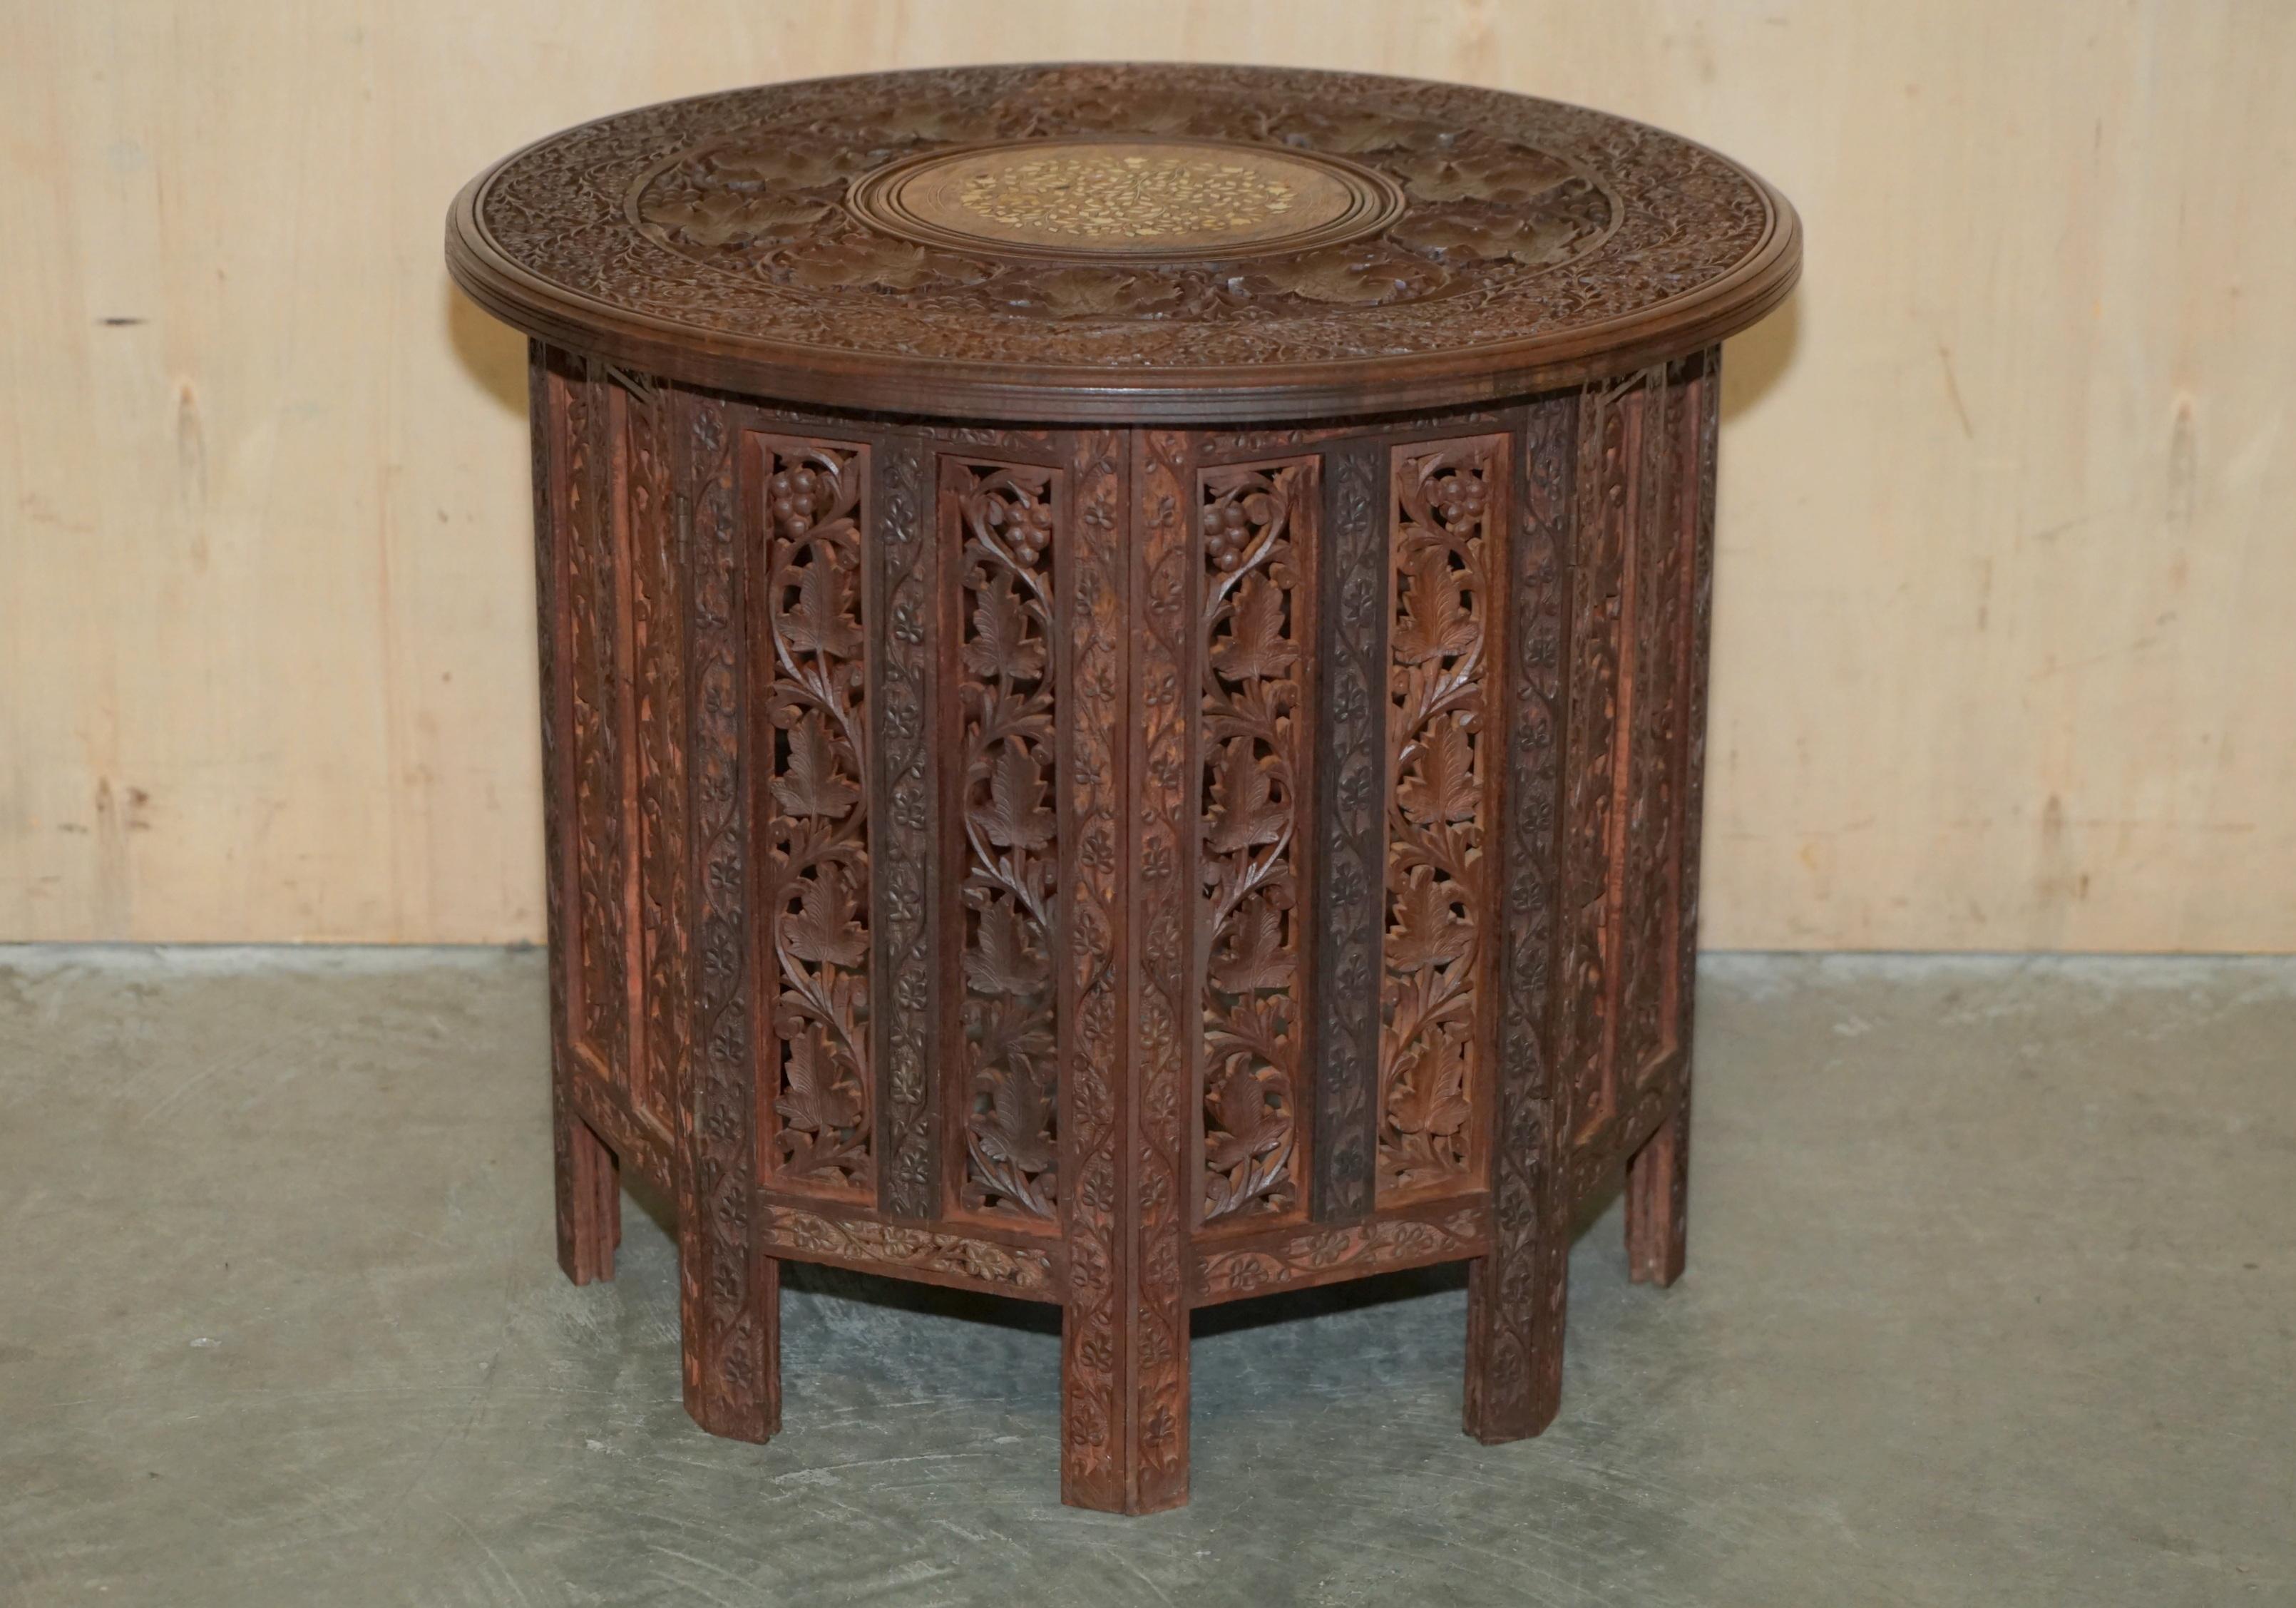 Royal House Antiques

Royal House Antiques is delighted to offer for sale this lovely Burmese heavily carved side table which was retailed through Liberty's London in 1890-1920 

Please note the delivery fee listed is just a guide, it covers within